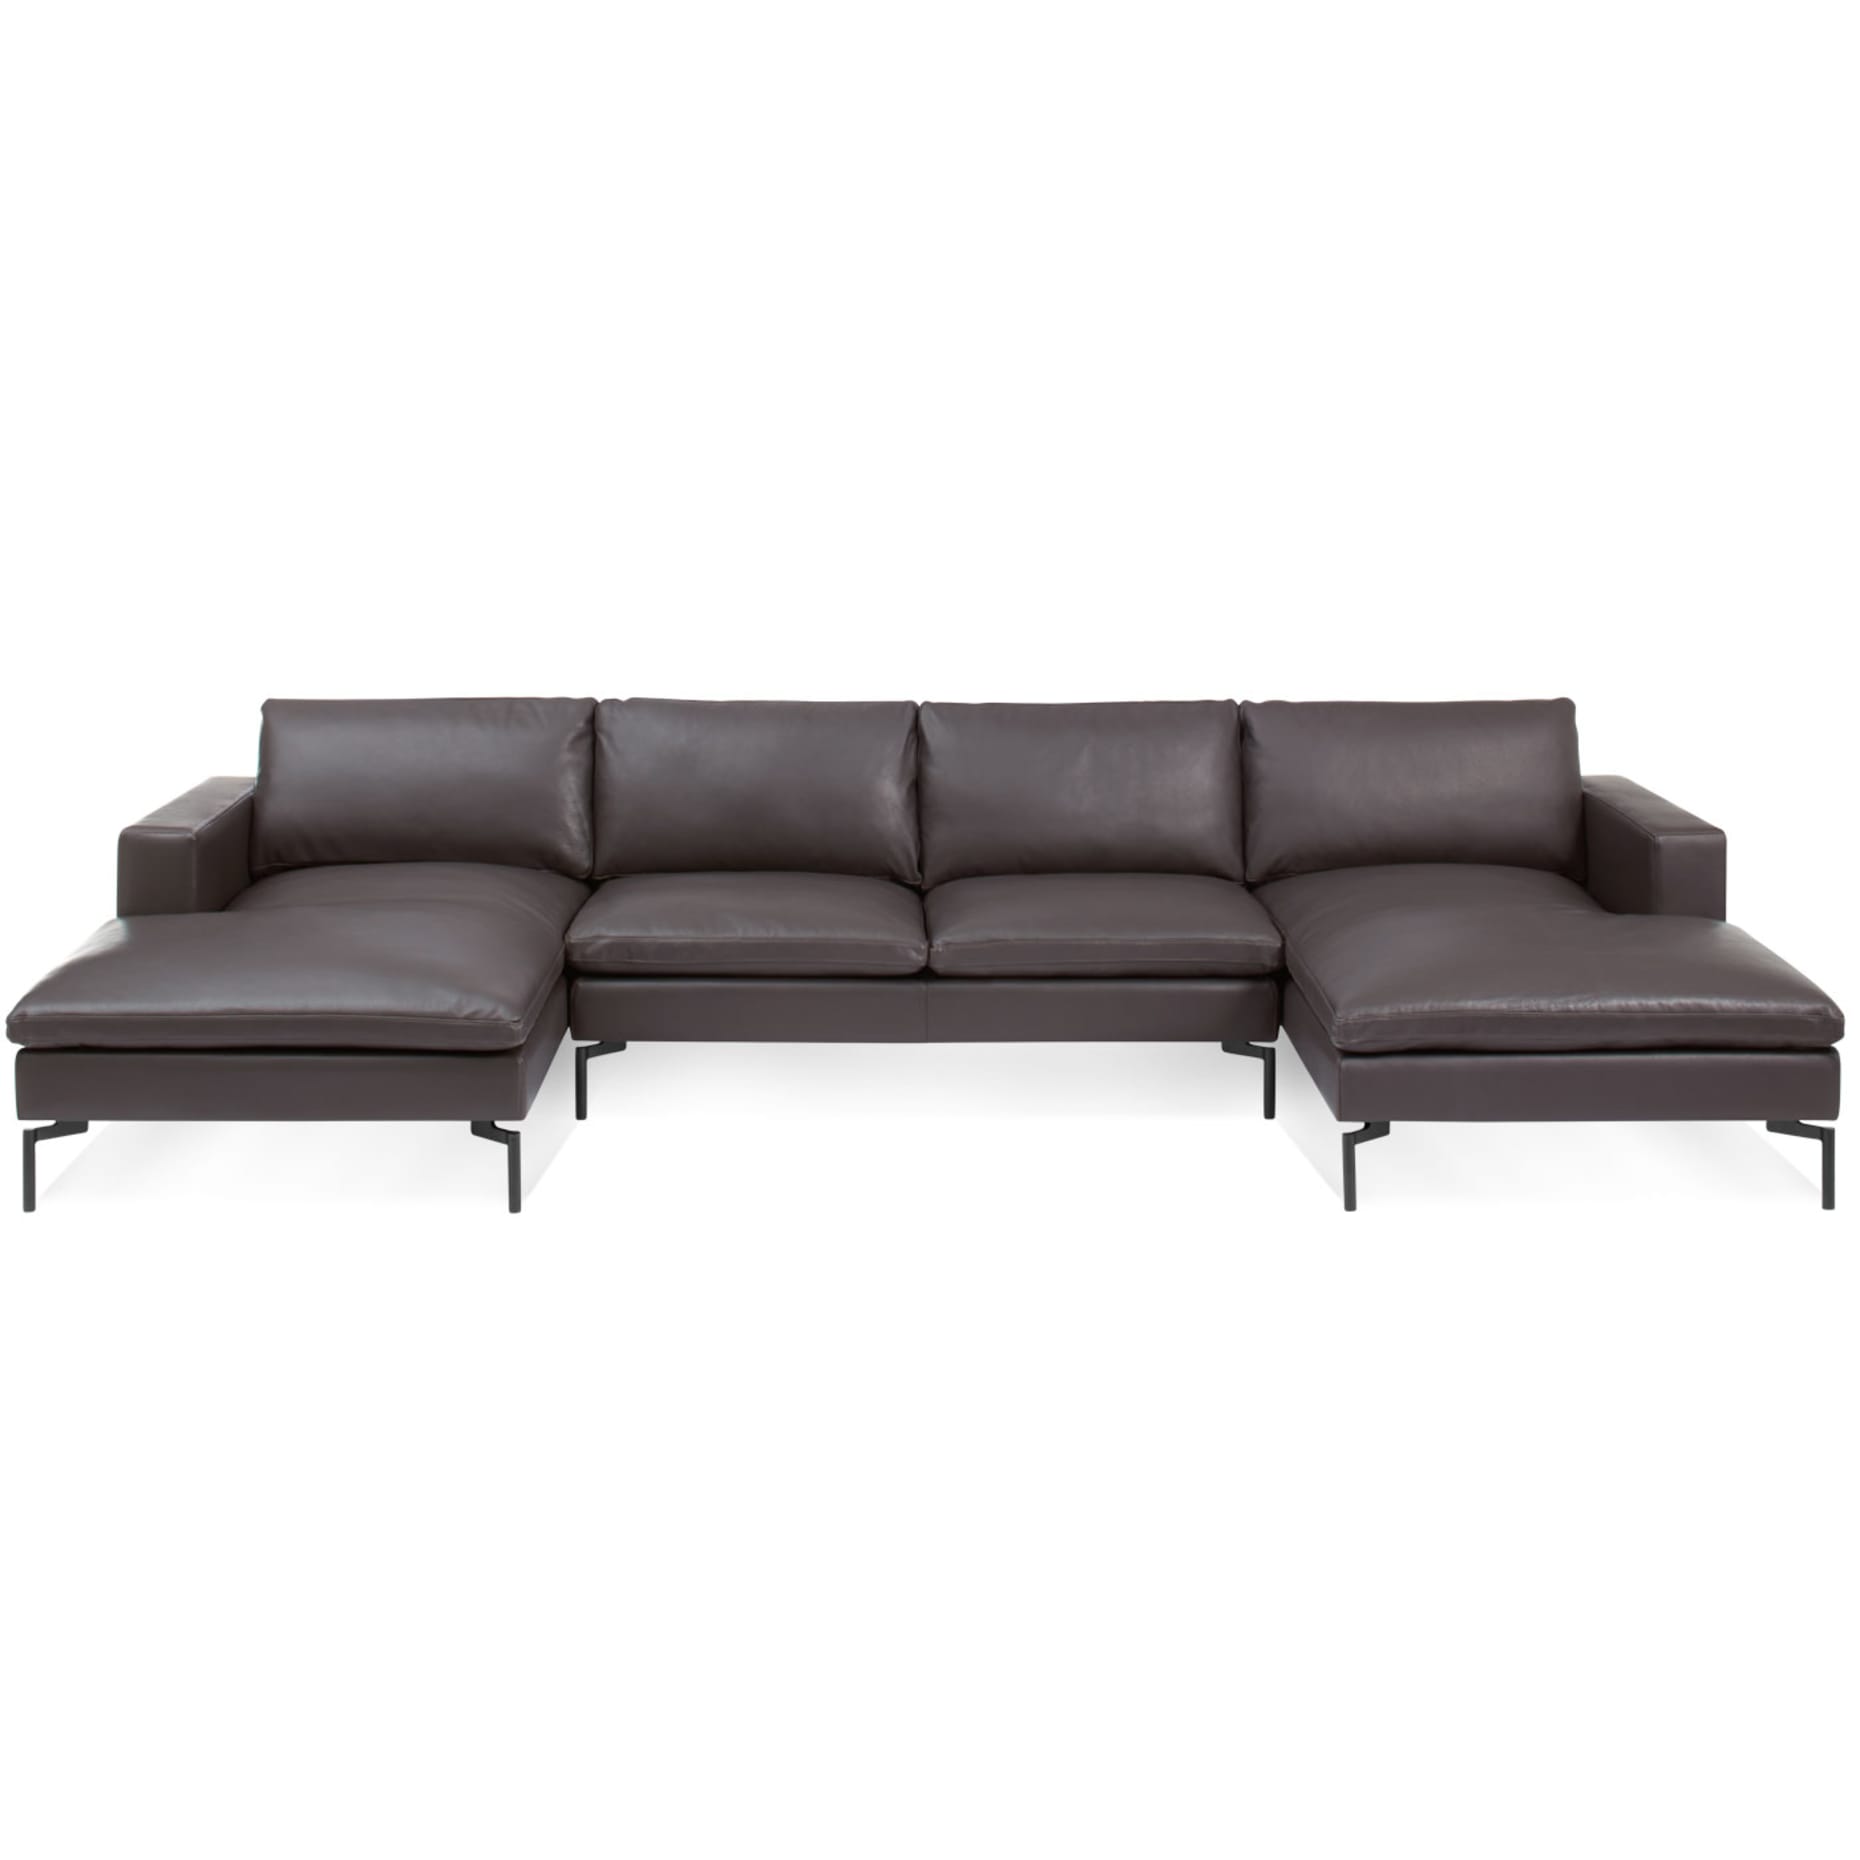 U Shaped Leather Sectional Sofa D3, Leather Couch San Diego